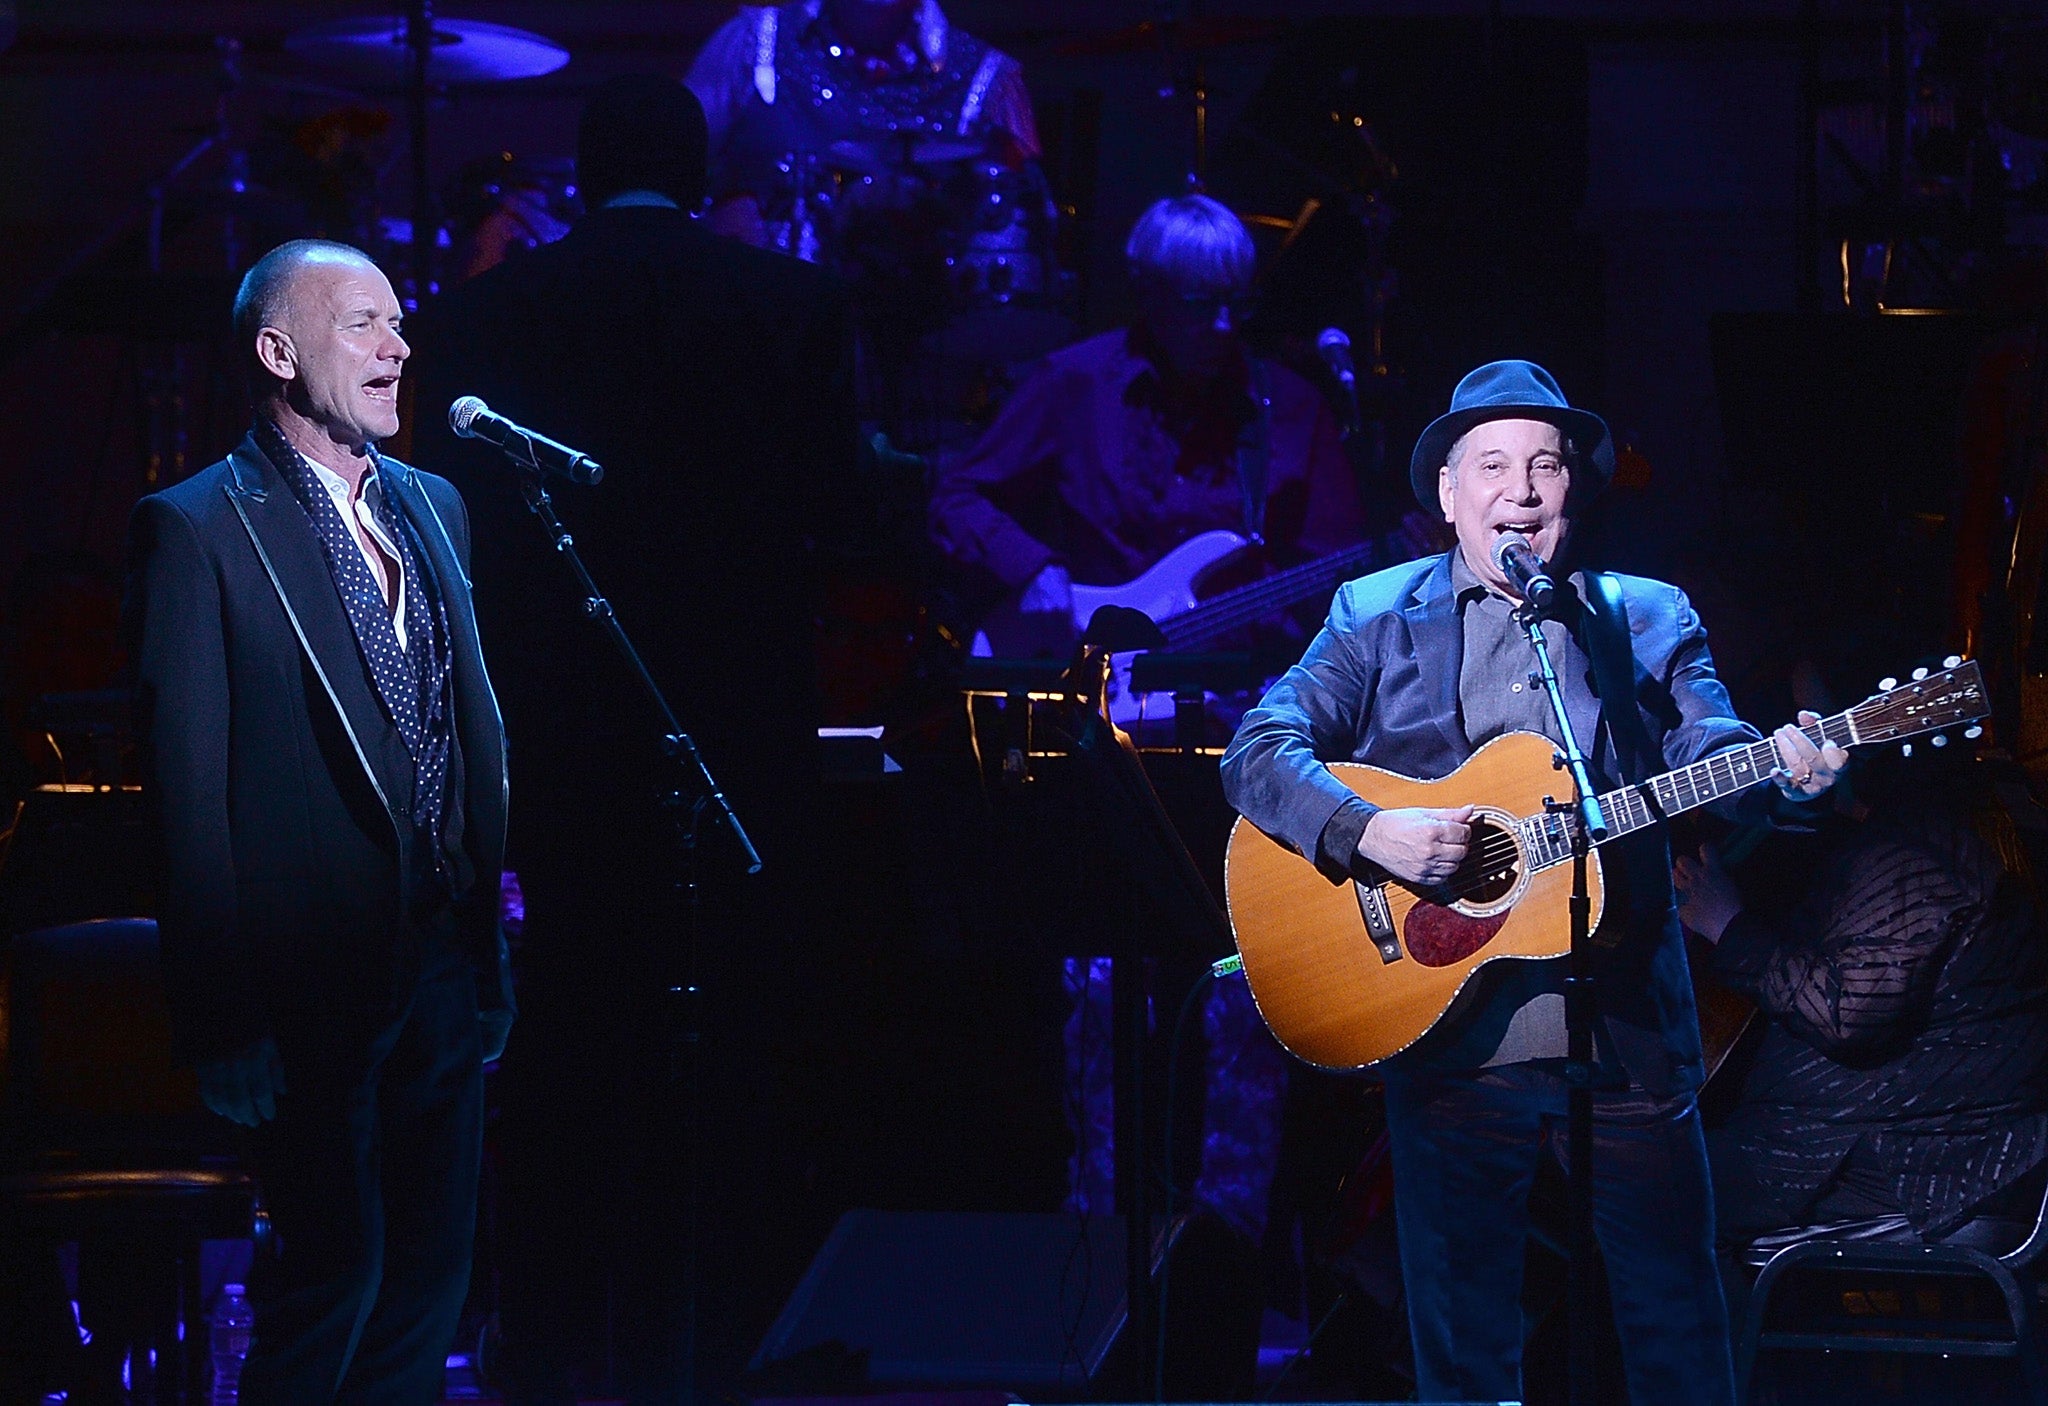 Paul Simon and Sting perform together as part of their world tour